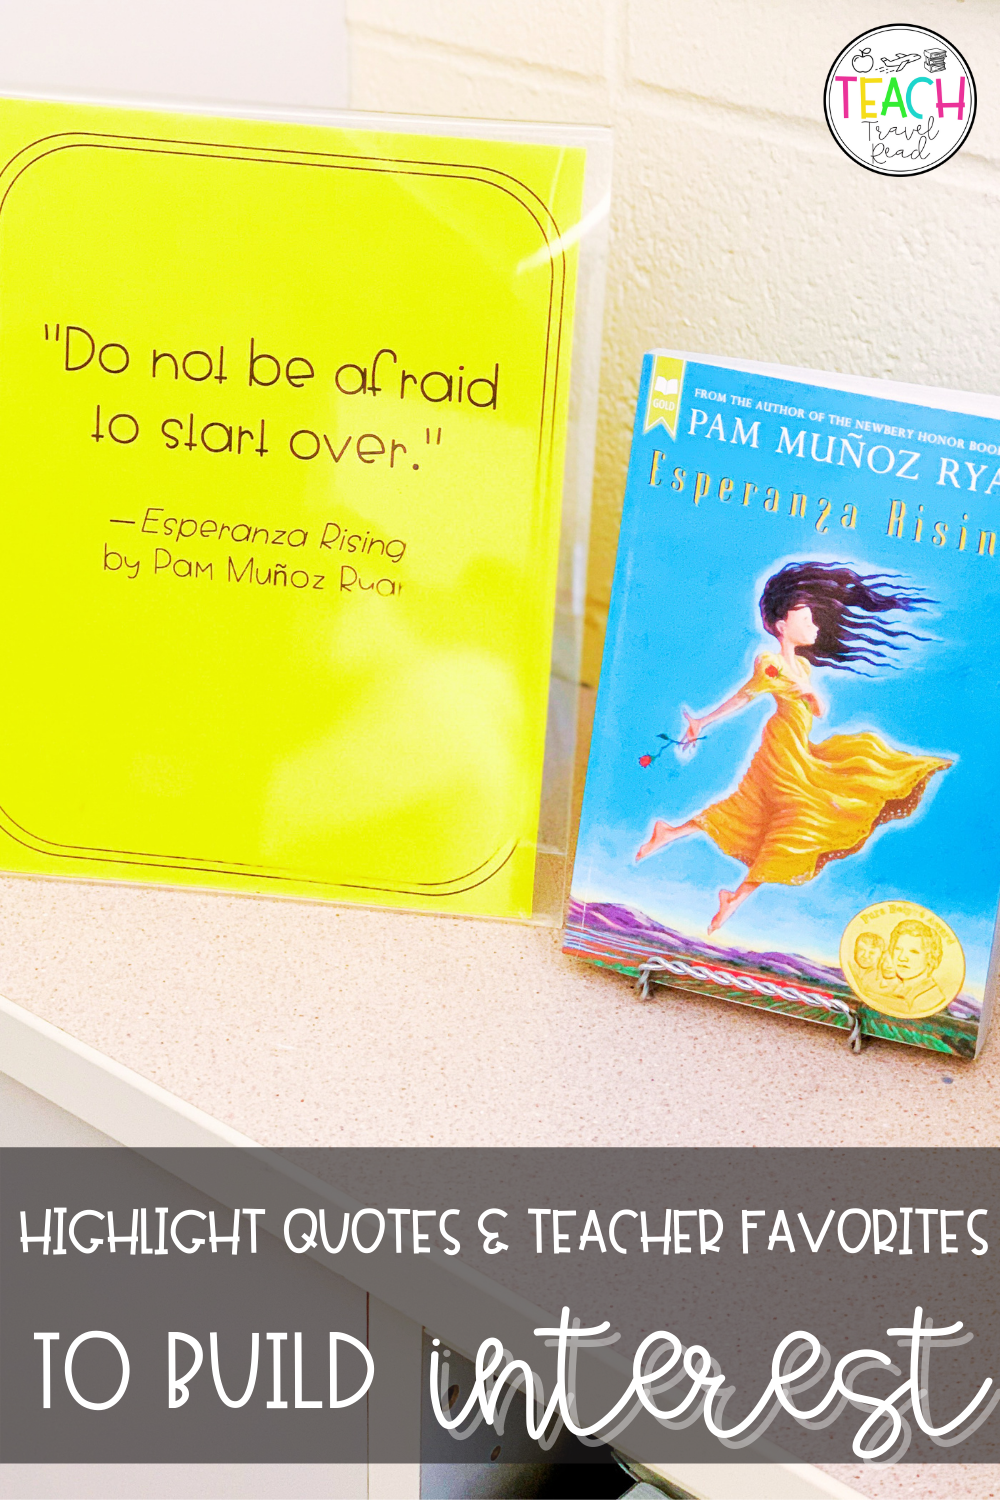 esperanza rising book on display and a quote from the book